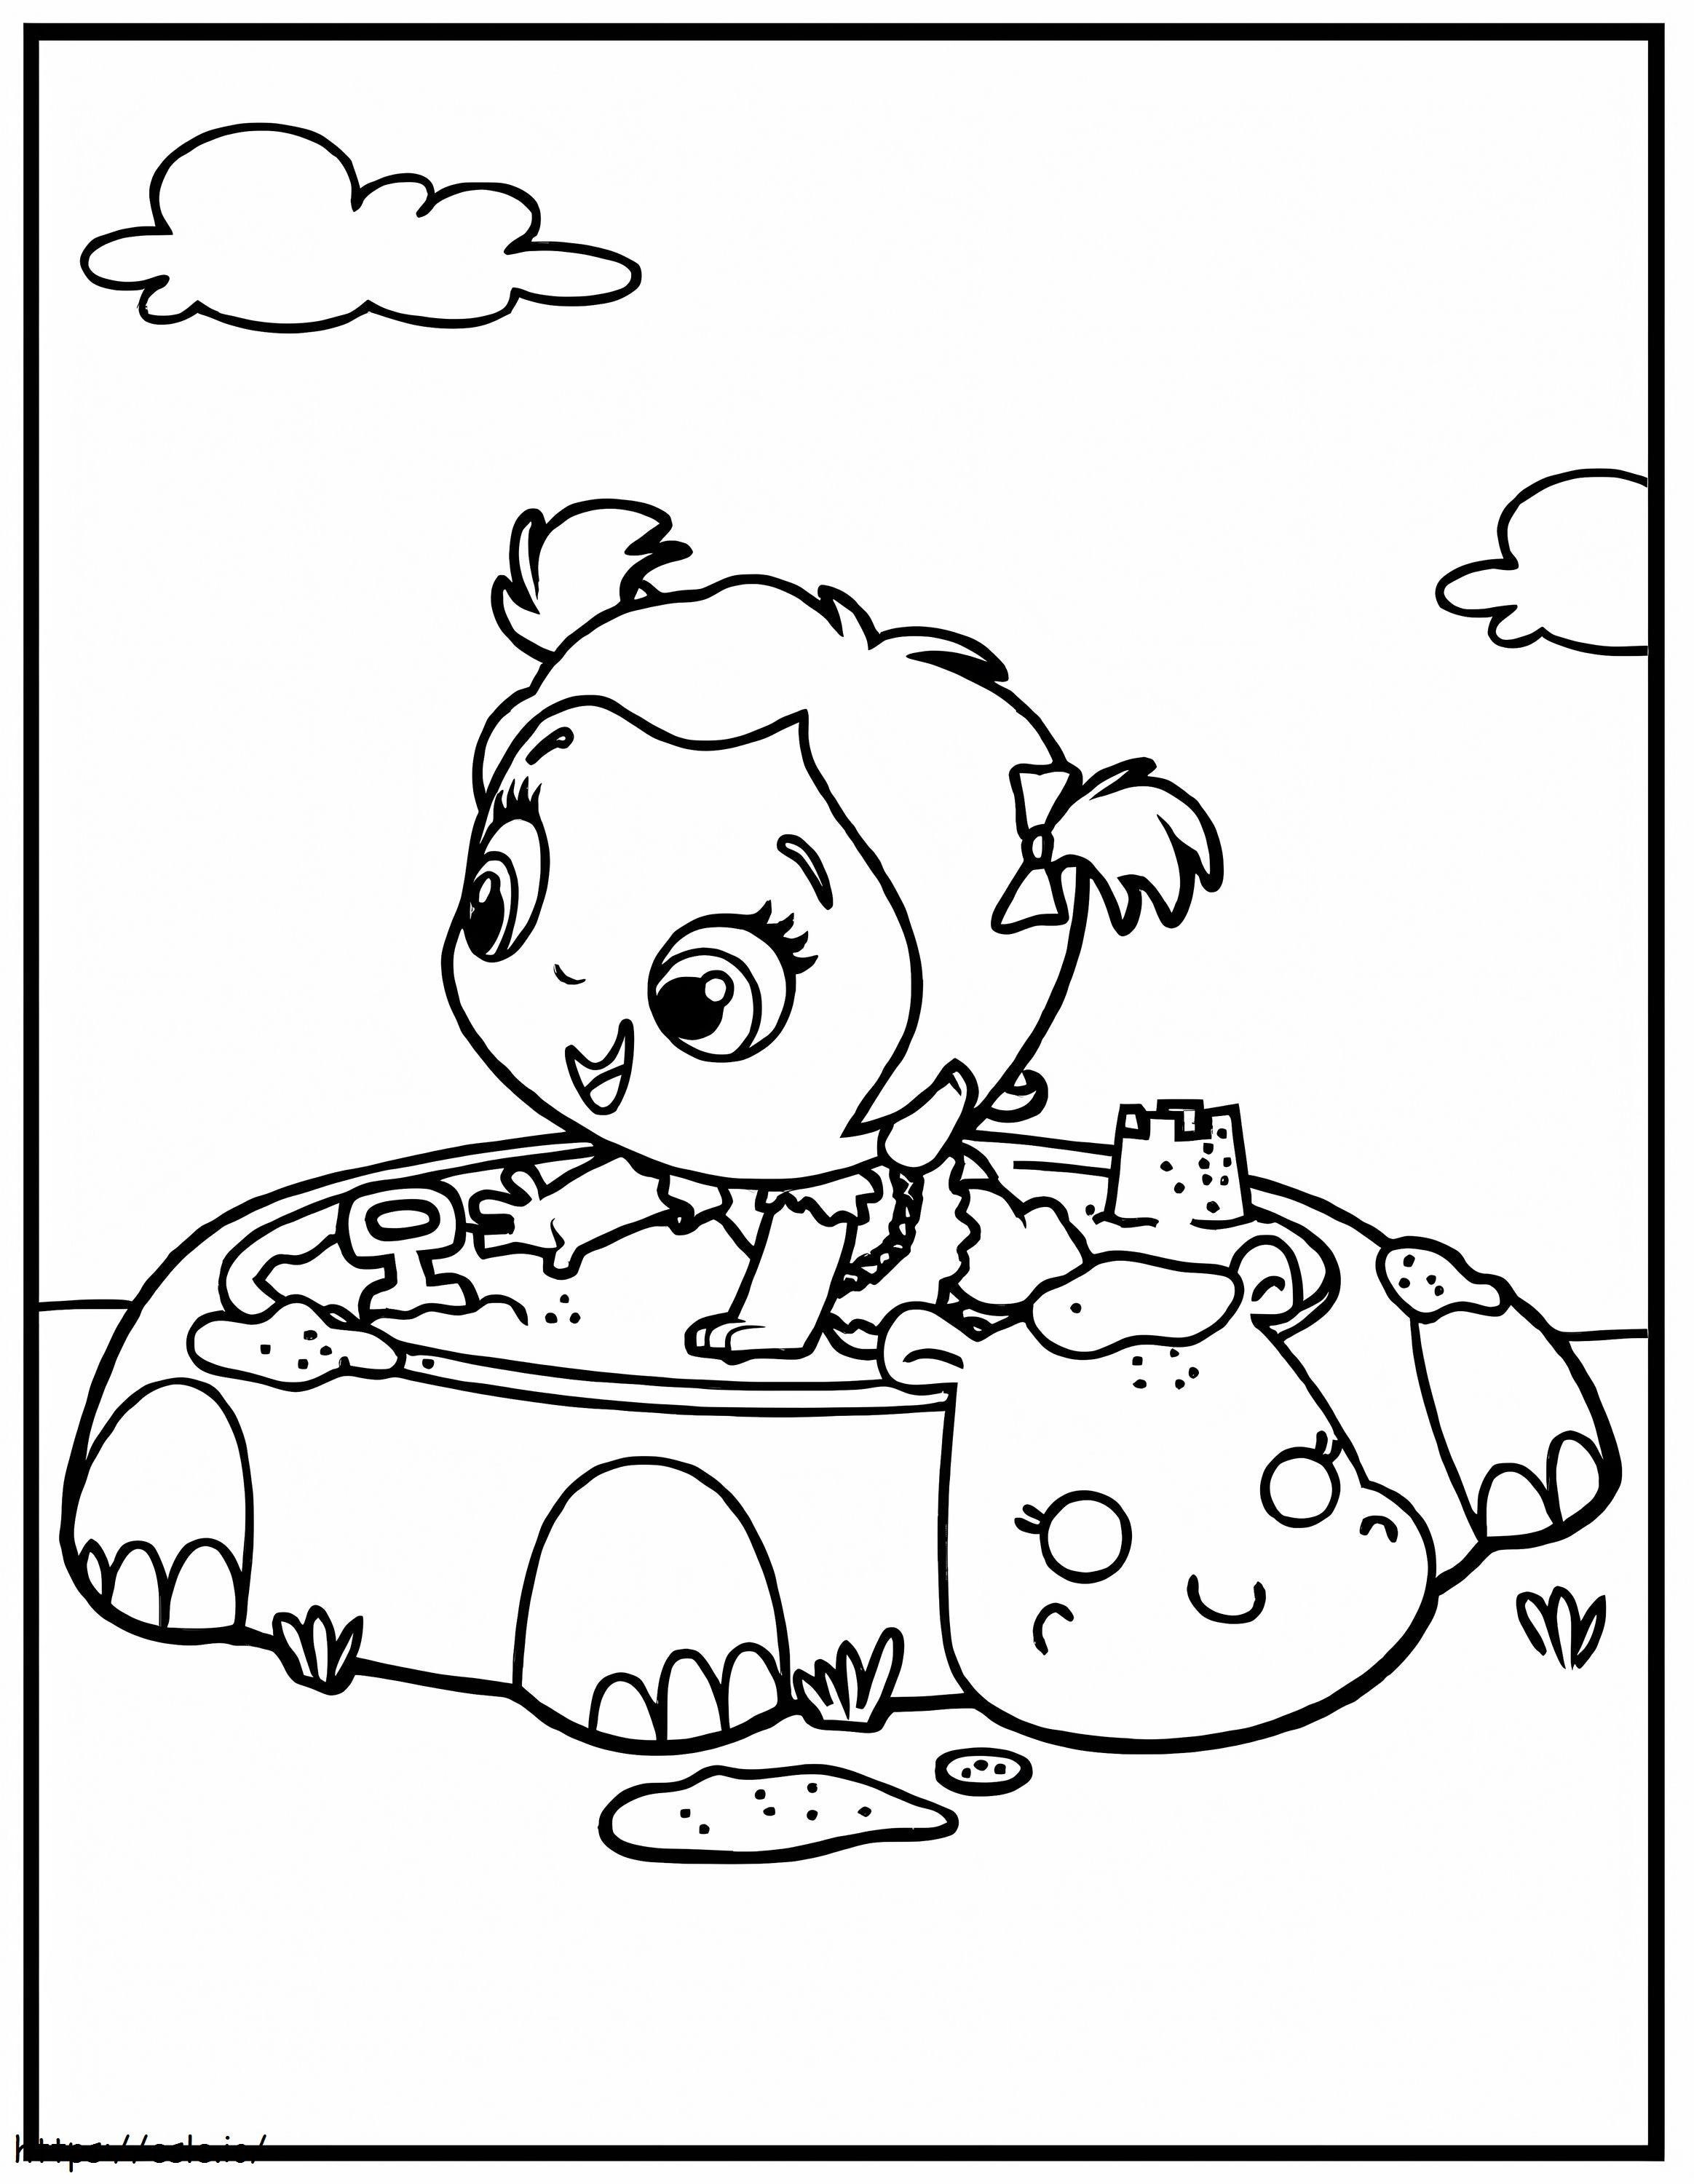 Print Baby Alive coloring page